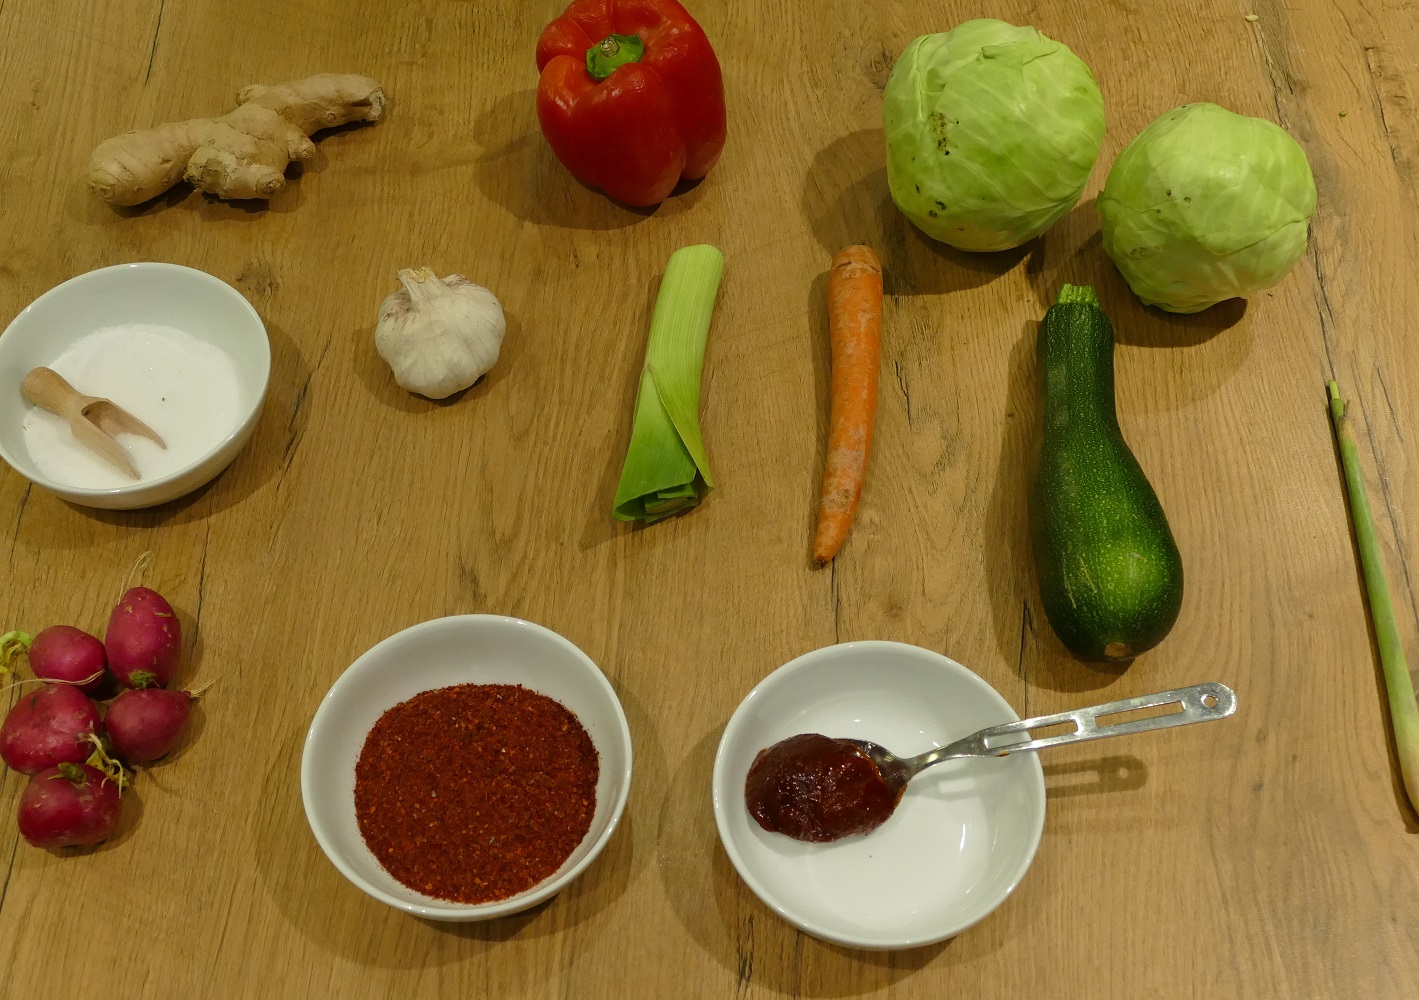 Ingredients such as leek, courgette, pepper, carrot or garlic lie on a wooden table.